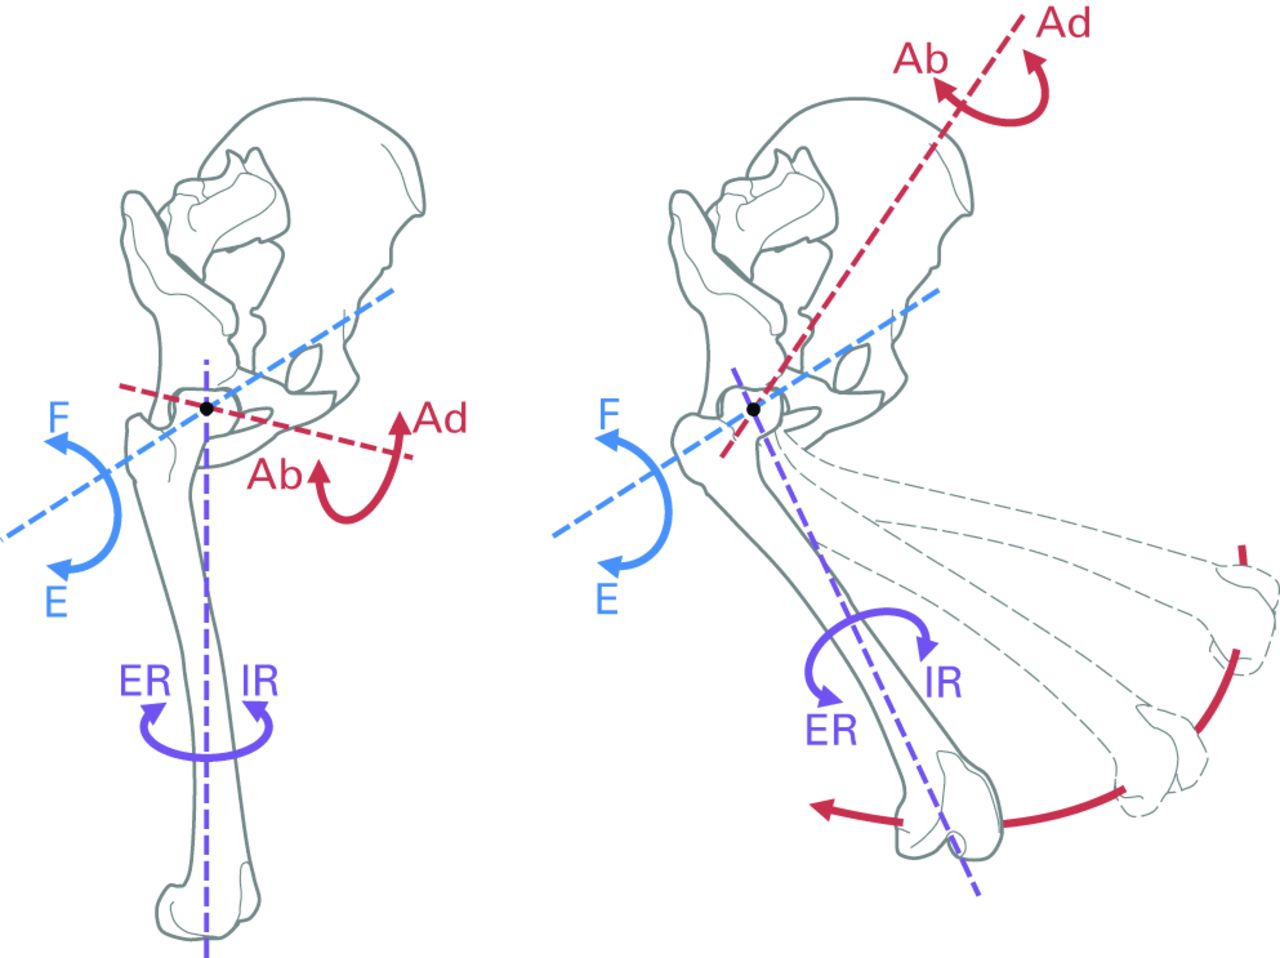 Fig. 2 
          Diagram showing the co-ordinate system
used throughout testing. The axis for flexion/extension (F/E, blue)
is fixed to the pelvis. The axis for internal/external rotation
(IR/ER, purple) is fixed to the femoral mechanical axis (connecting
the hip and knee joint centres). The axis for ab/adduction (Ab/Ad,
red) is floating and varies with hip flexion; ab/adduction moves
the knee away-from/towards the sagittal plane (without changing
the angle of hip flexion or rotation).
        